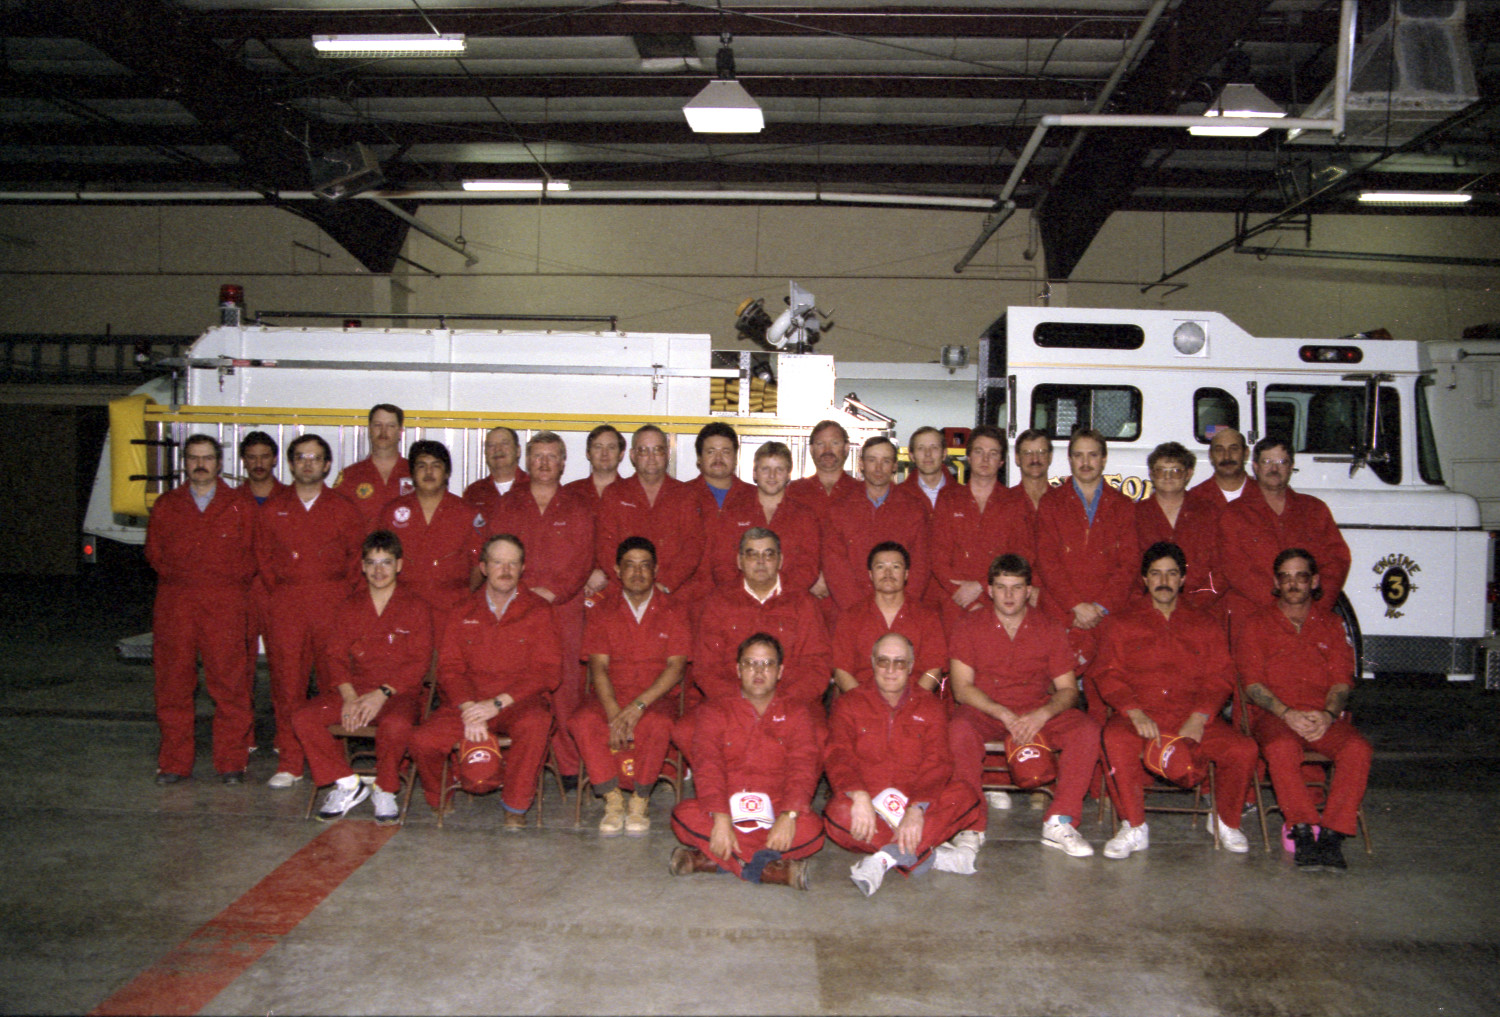 [Hereford Fire Department's Volunteers, 1991]
                                                
                                                    [Sequence #]: 1 of 1
                                                